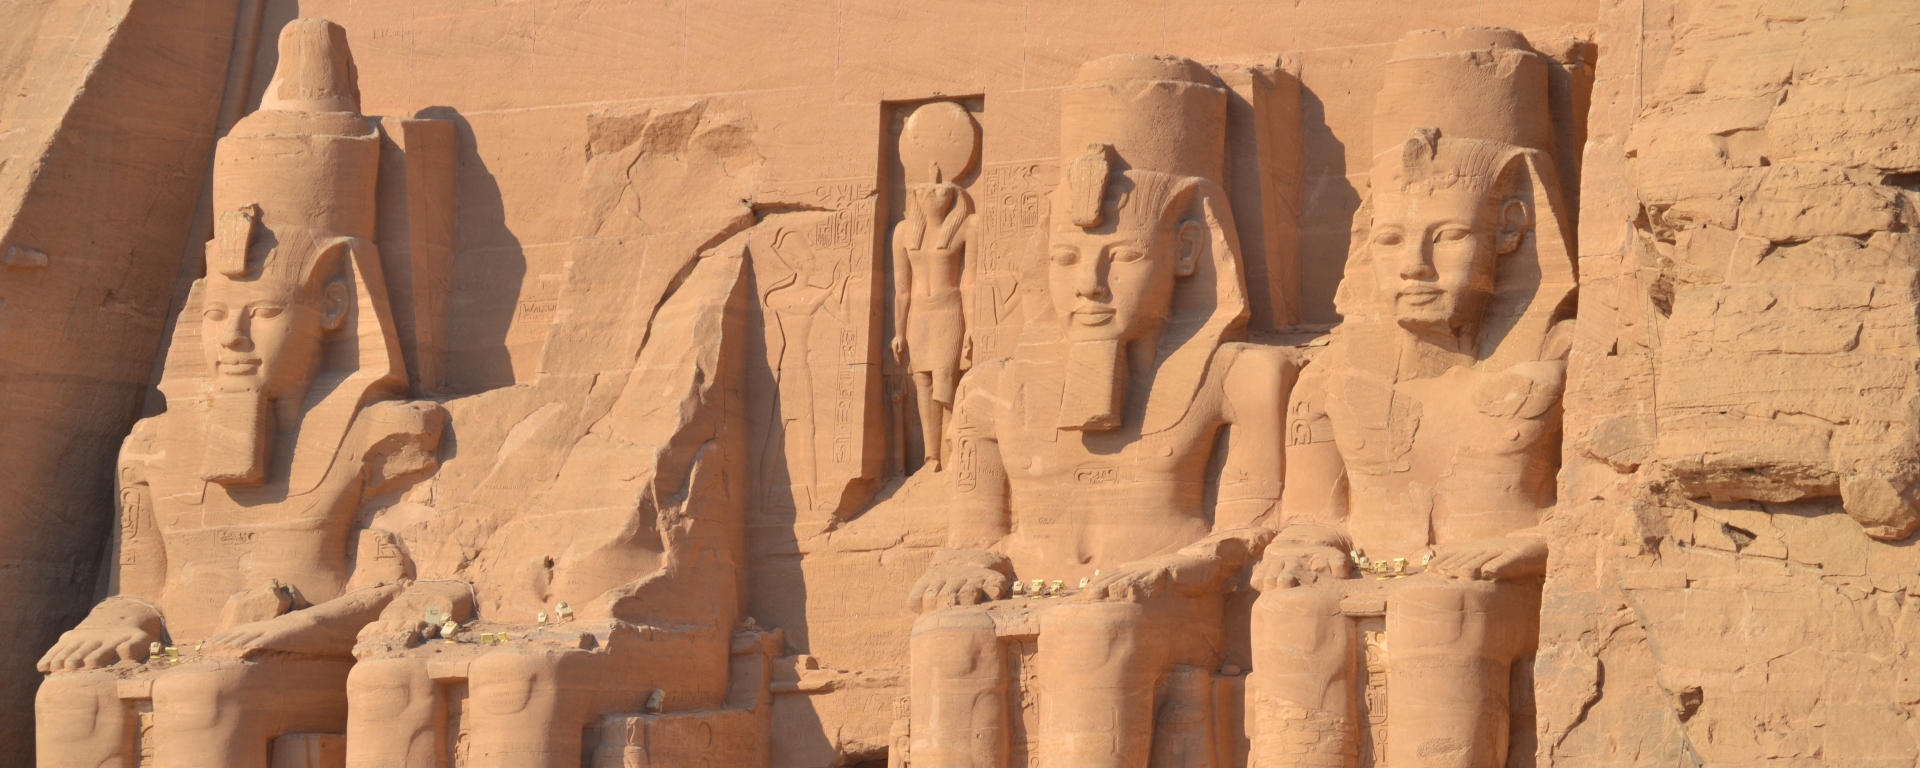 The famous Abu Simbel Temple - the great temple of Ramses II